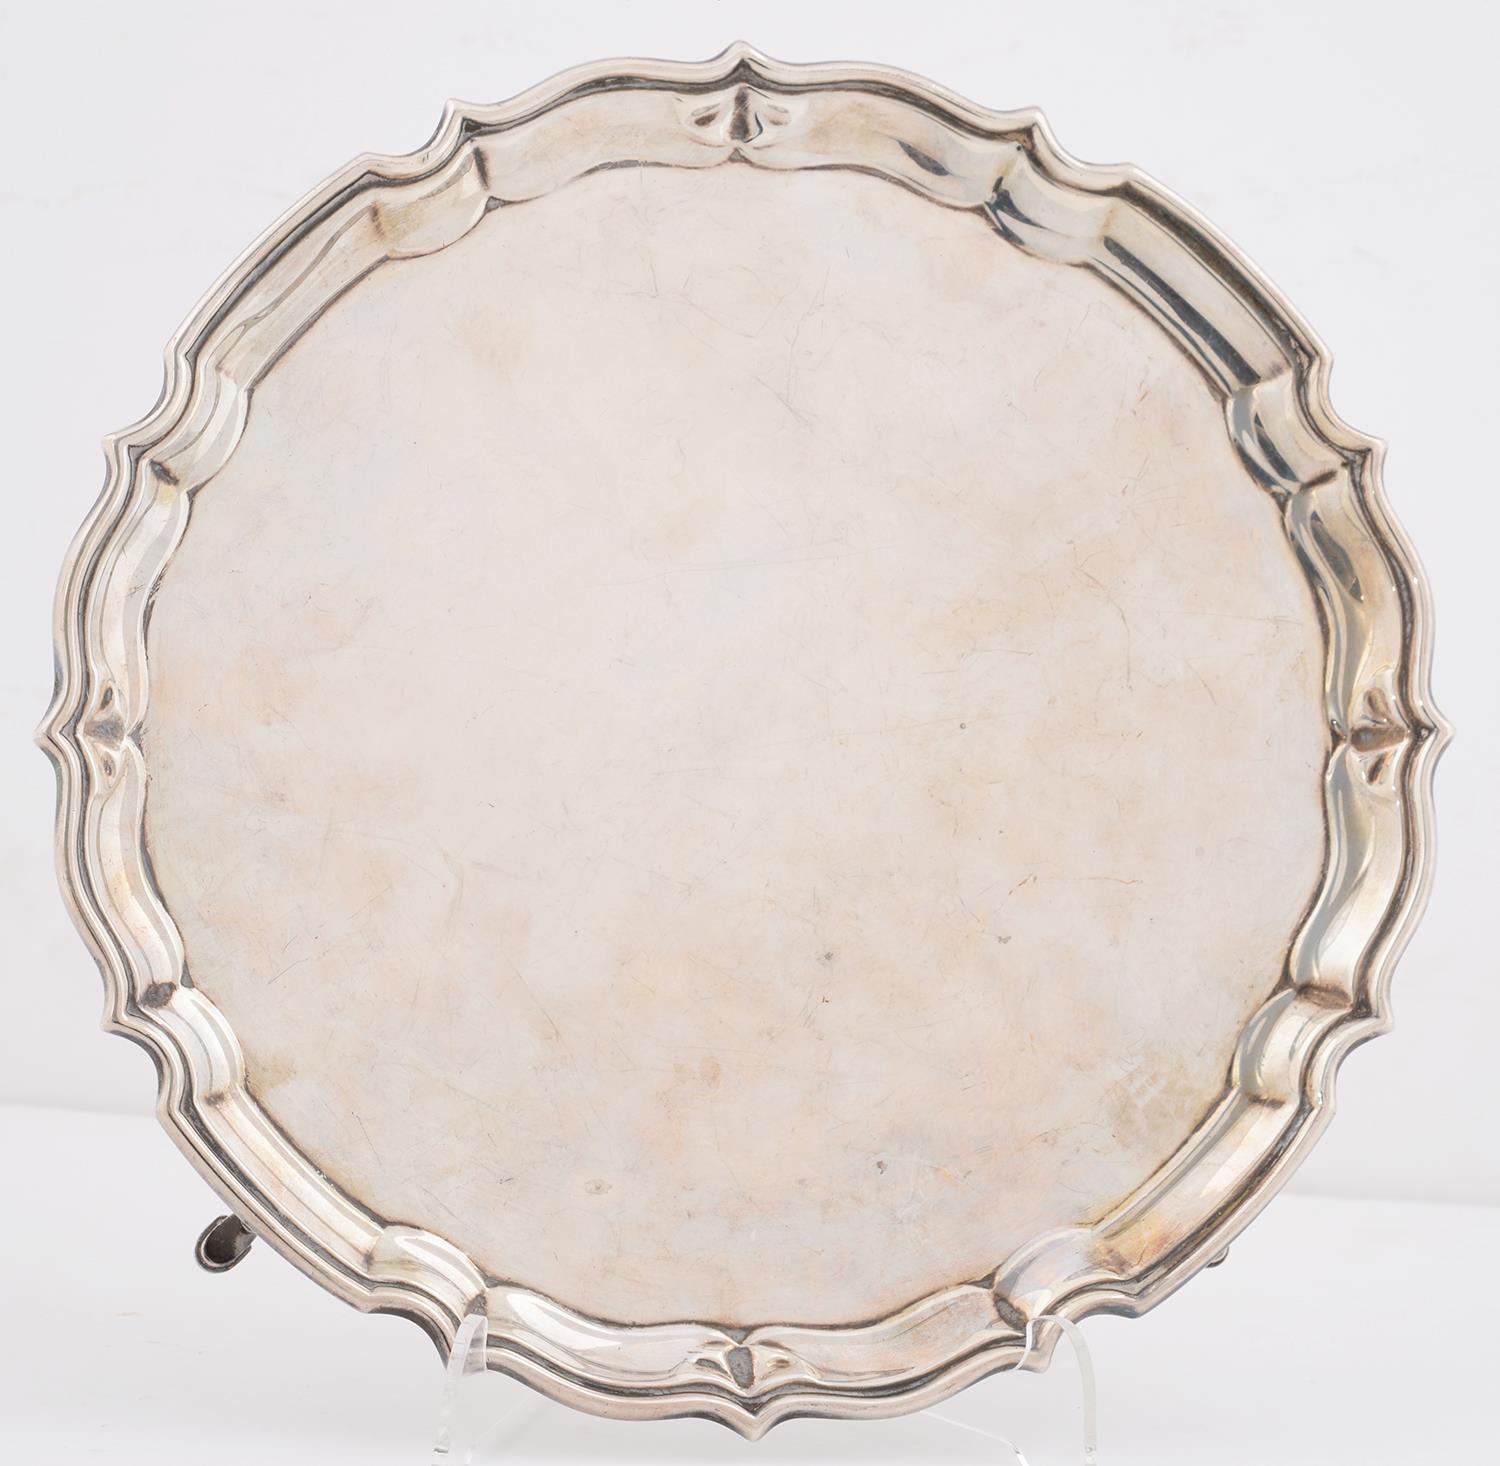 A GEORGE V SILVER SALVER, WITH MOULDED RIM, ON FOUR HOOF FEET, 26CM DIAM, BY BARKER BROS LTD,